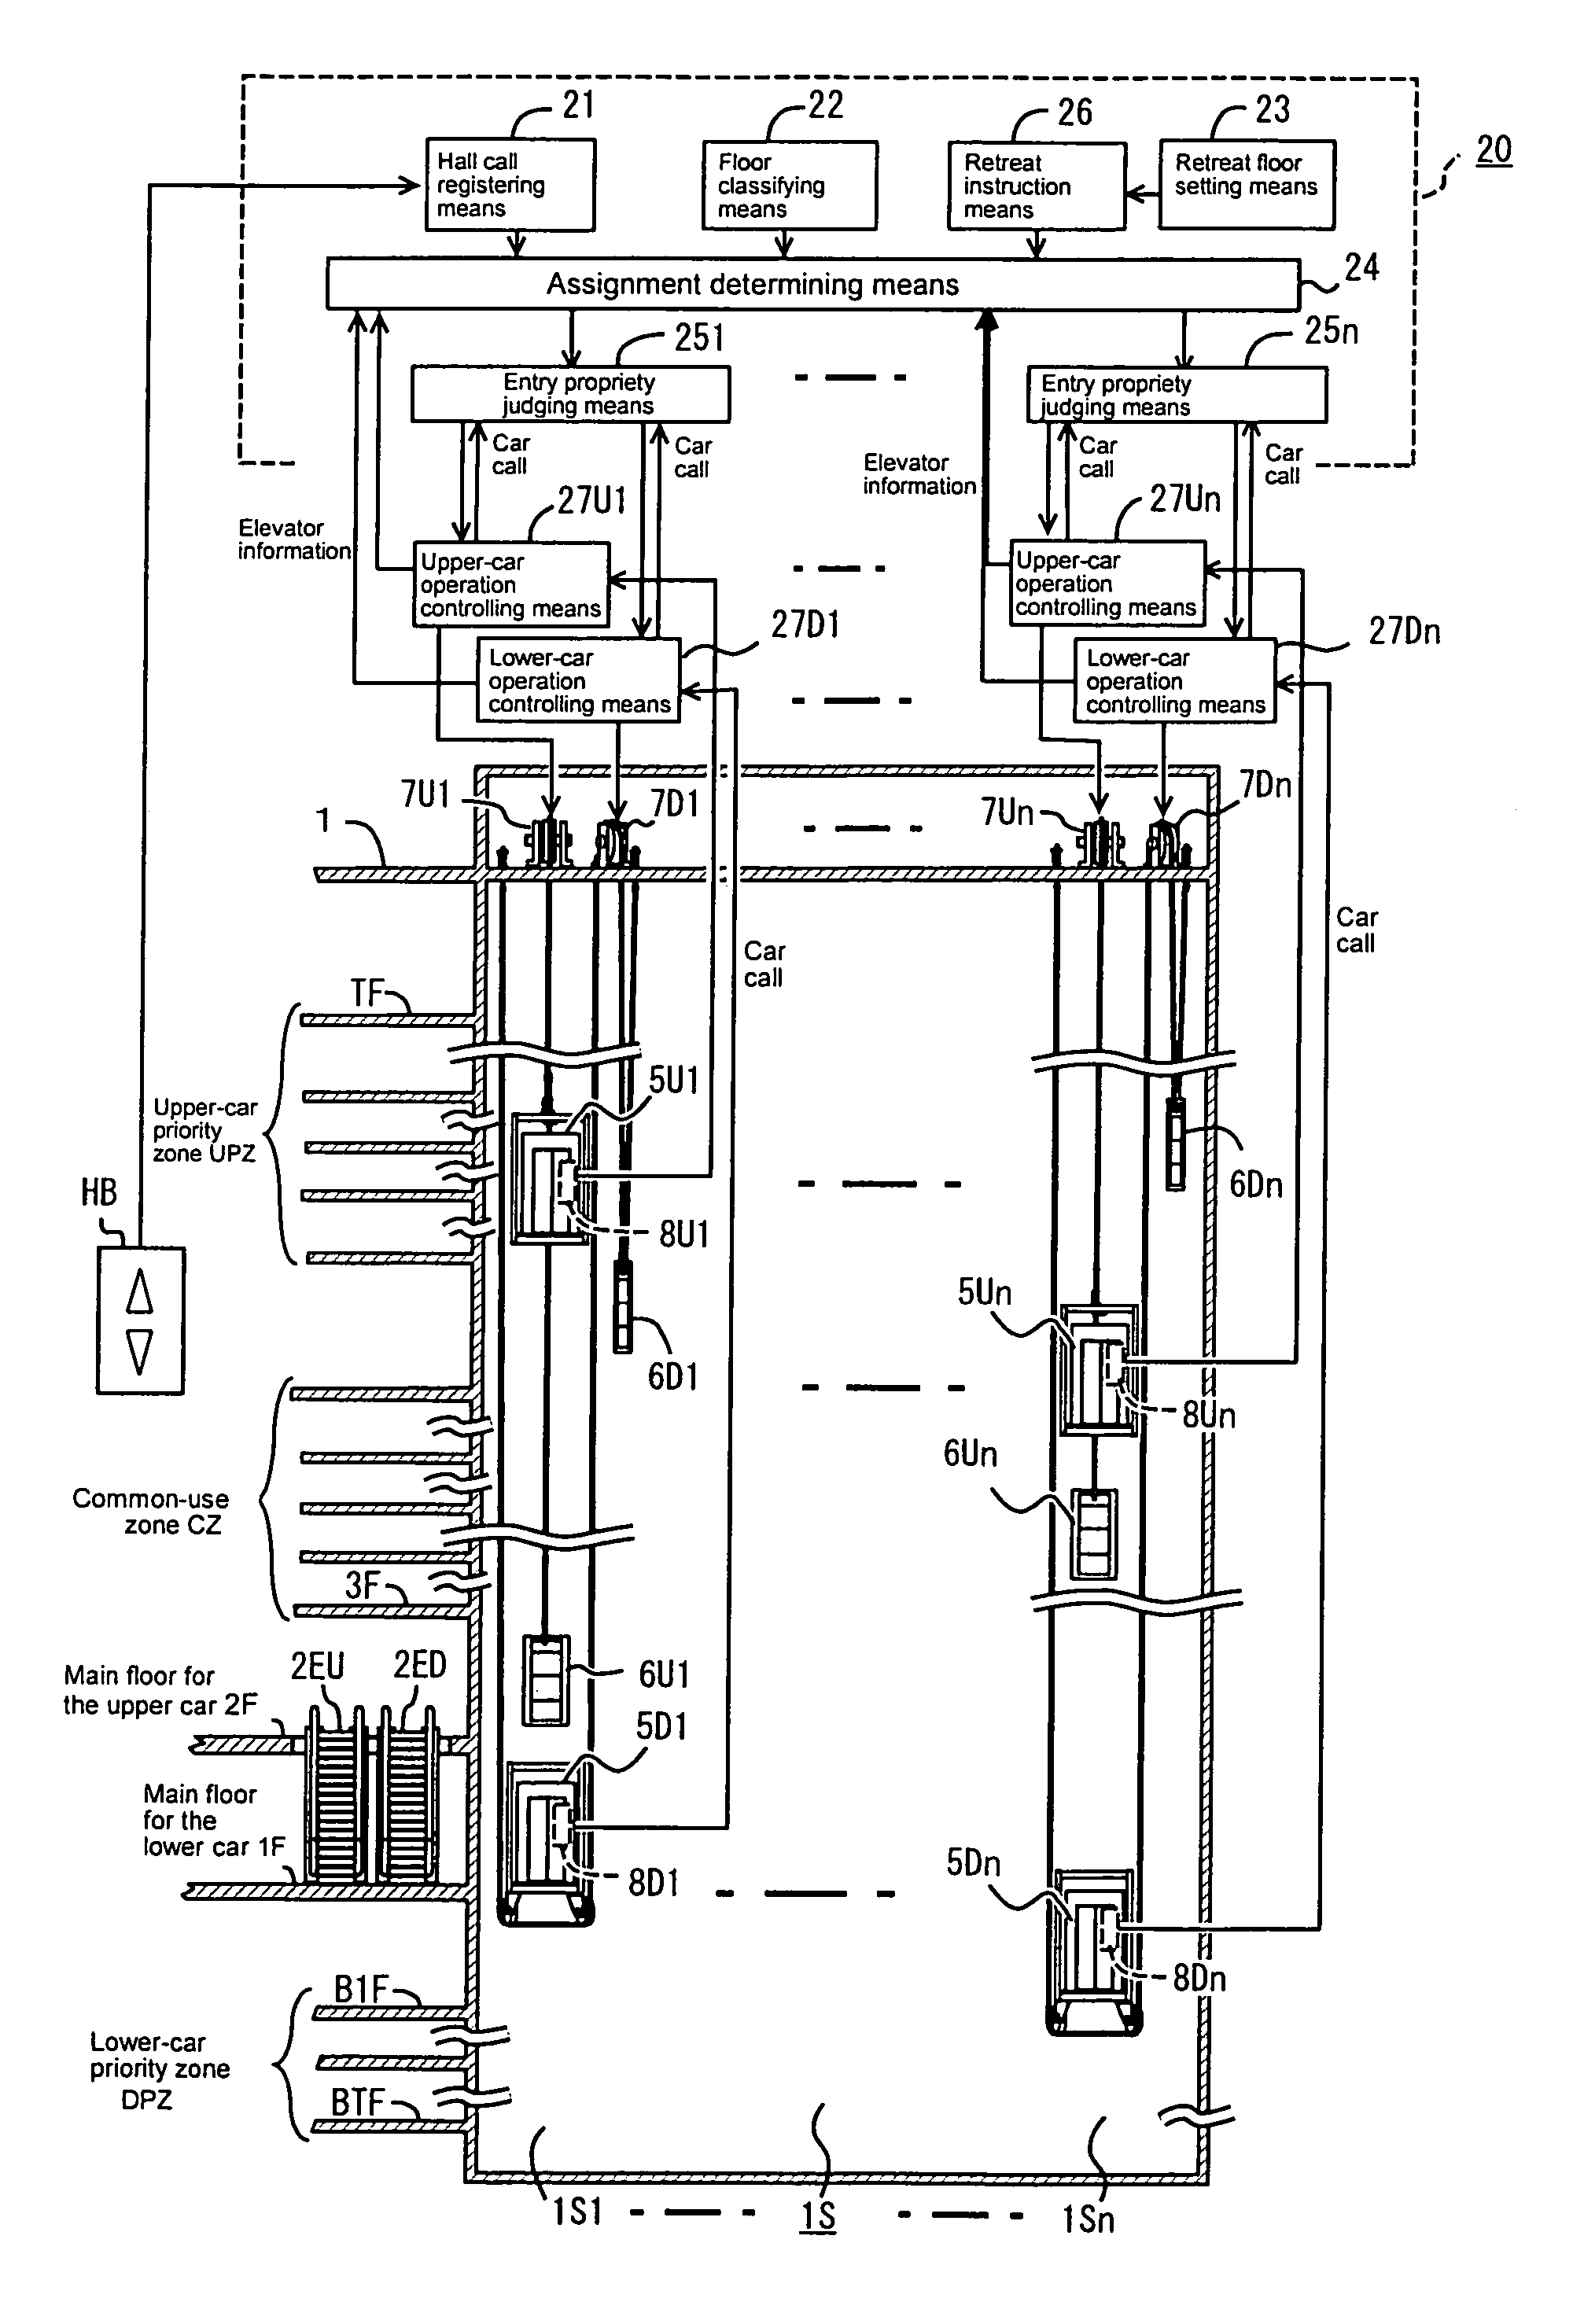 Apparatus for elevator group control